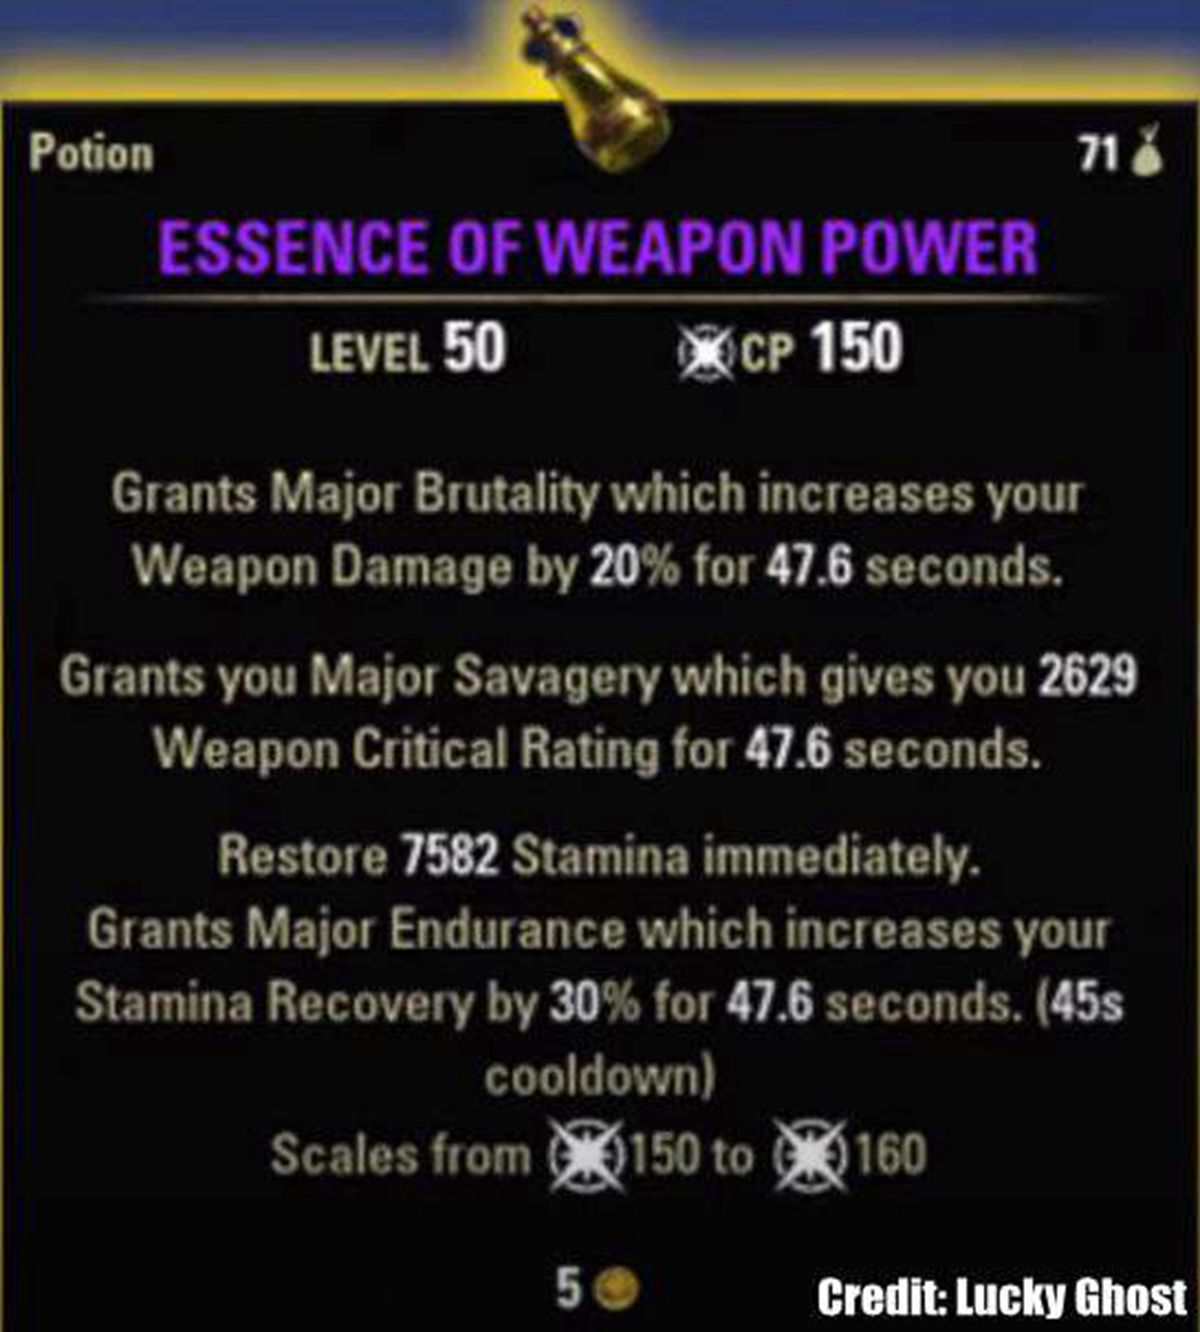 How to Increase DPS in ESO PIC 1 Essence of Weapon Power